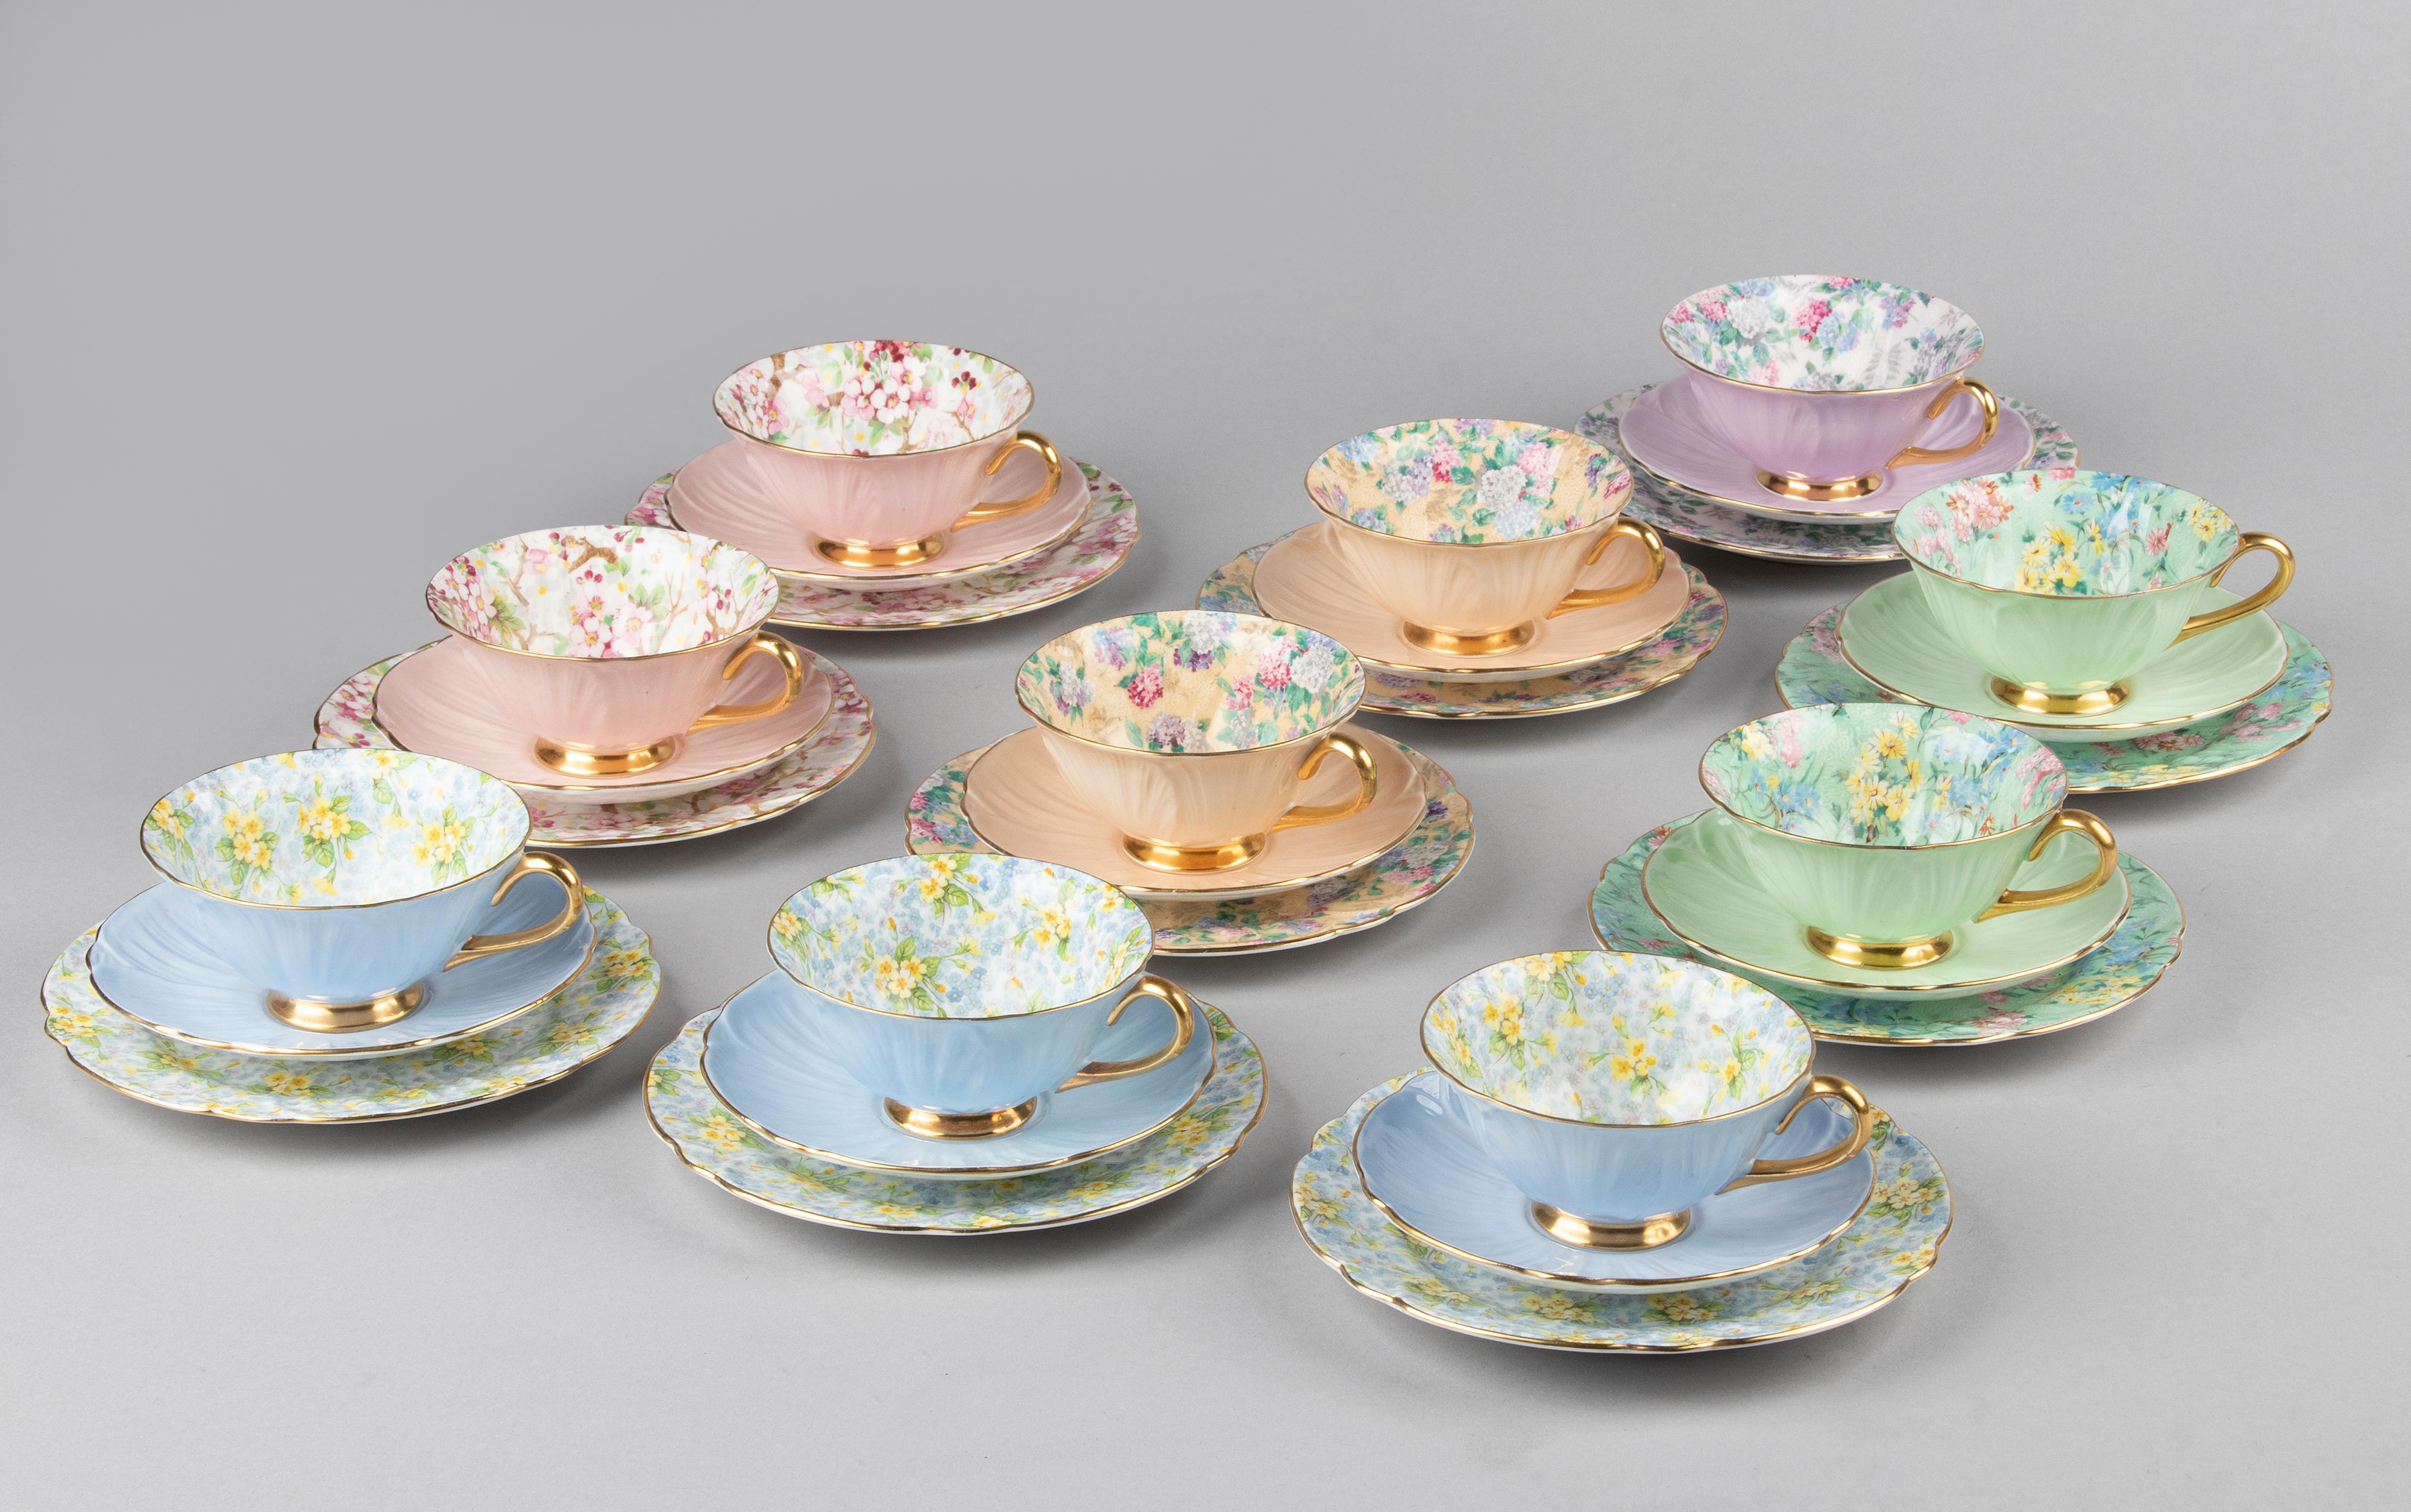 Beautiful set of 10 porcelain tea trios from the English brand Shelley. The cups and saucers are decorated with different chintz patterns on the inside, and leaf-shaped bottom. The cake plates and the cups and saucers match each other. Rare set.